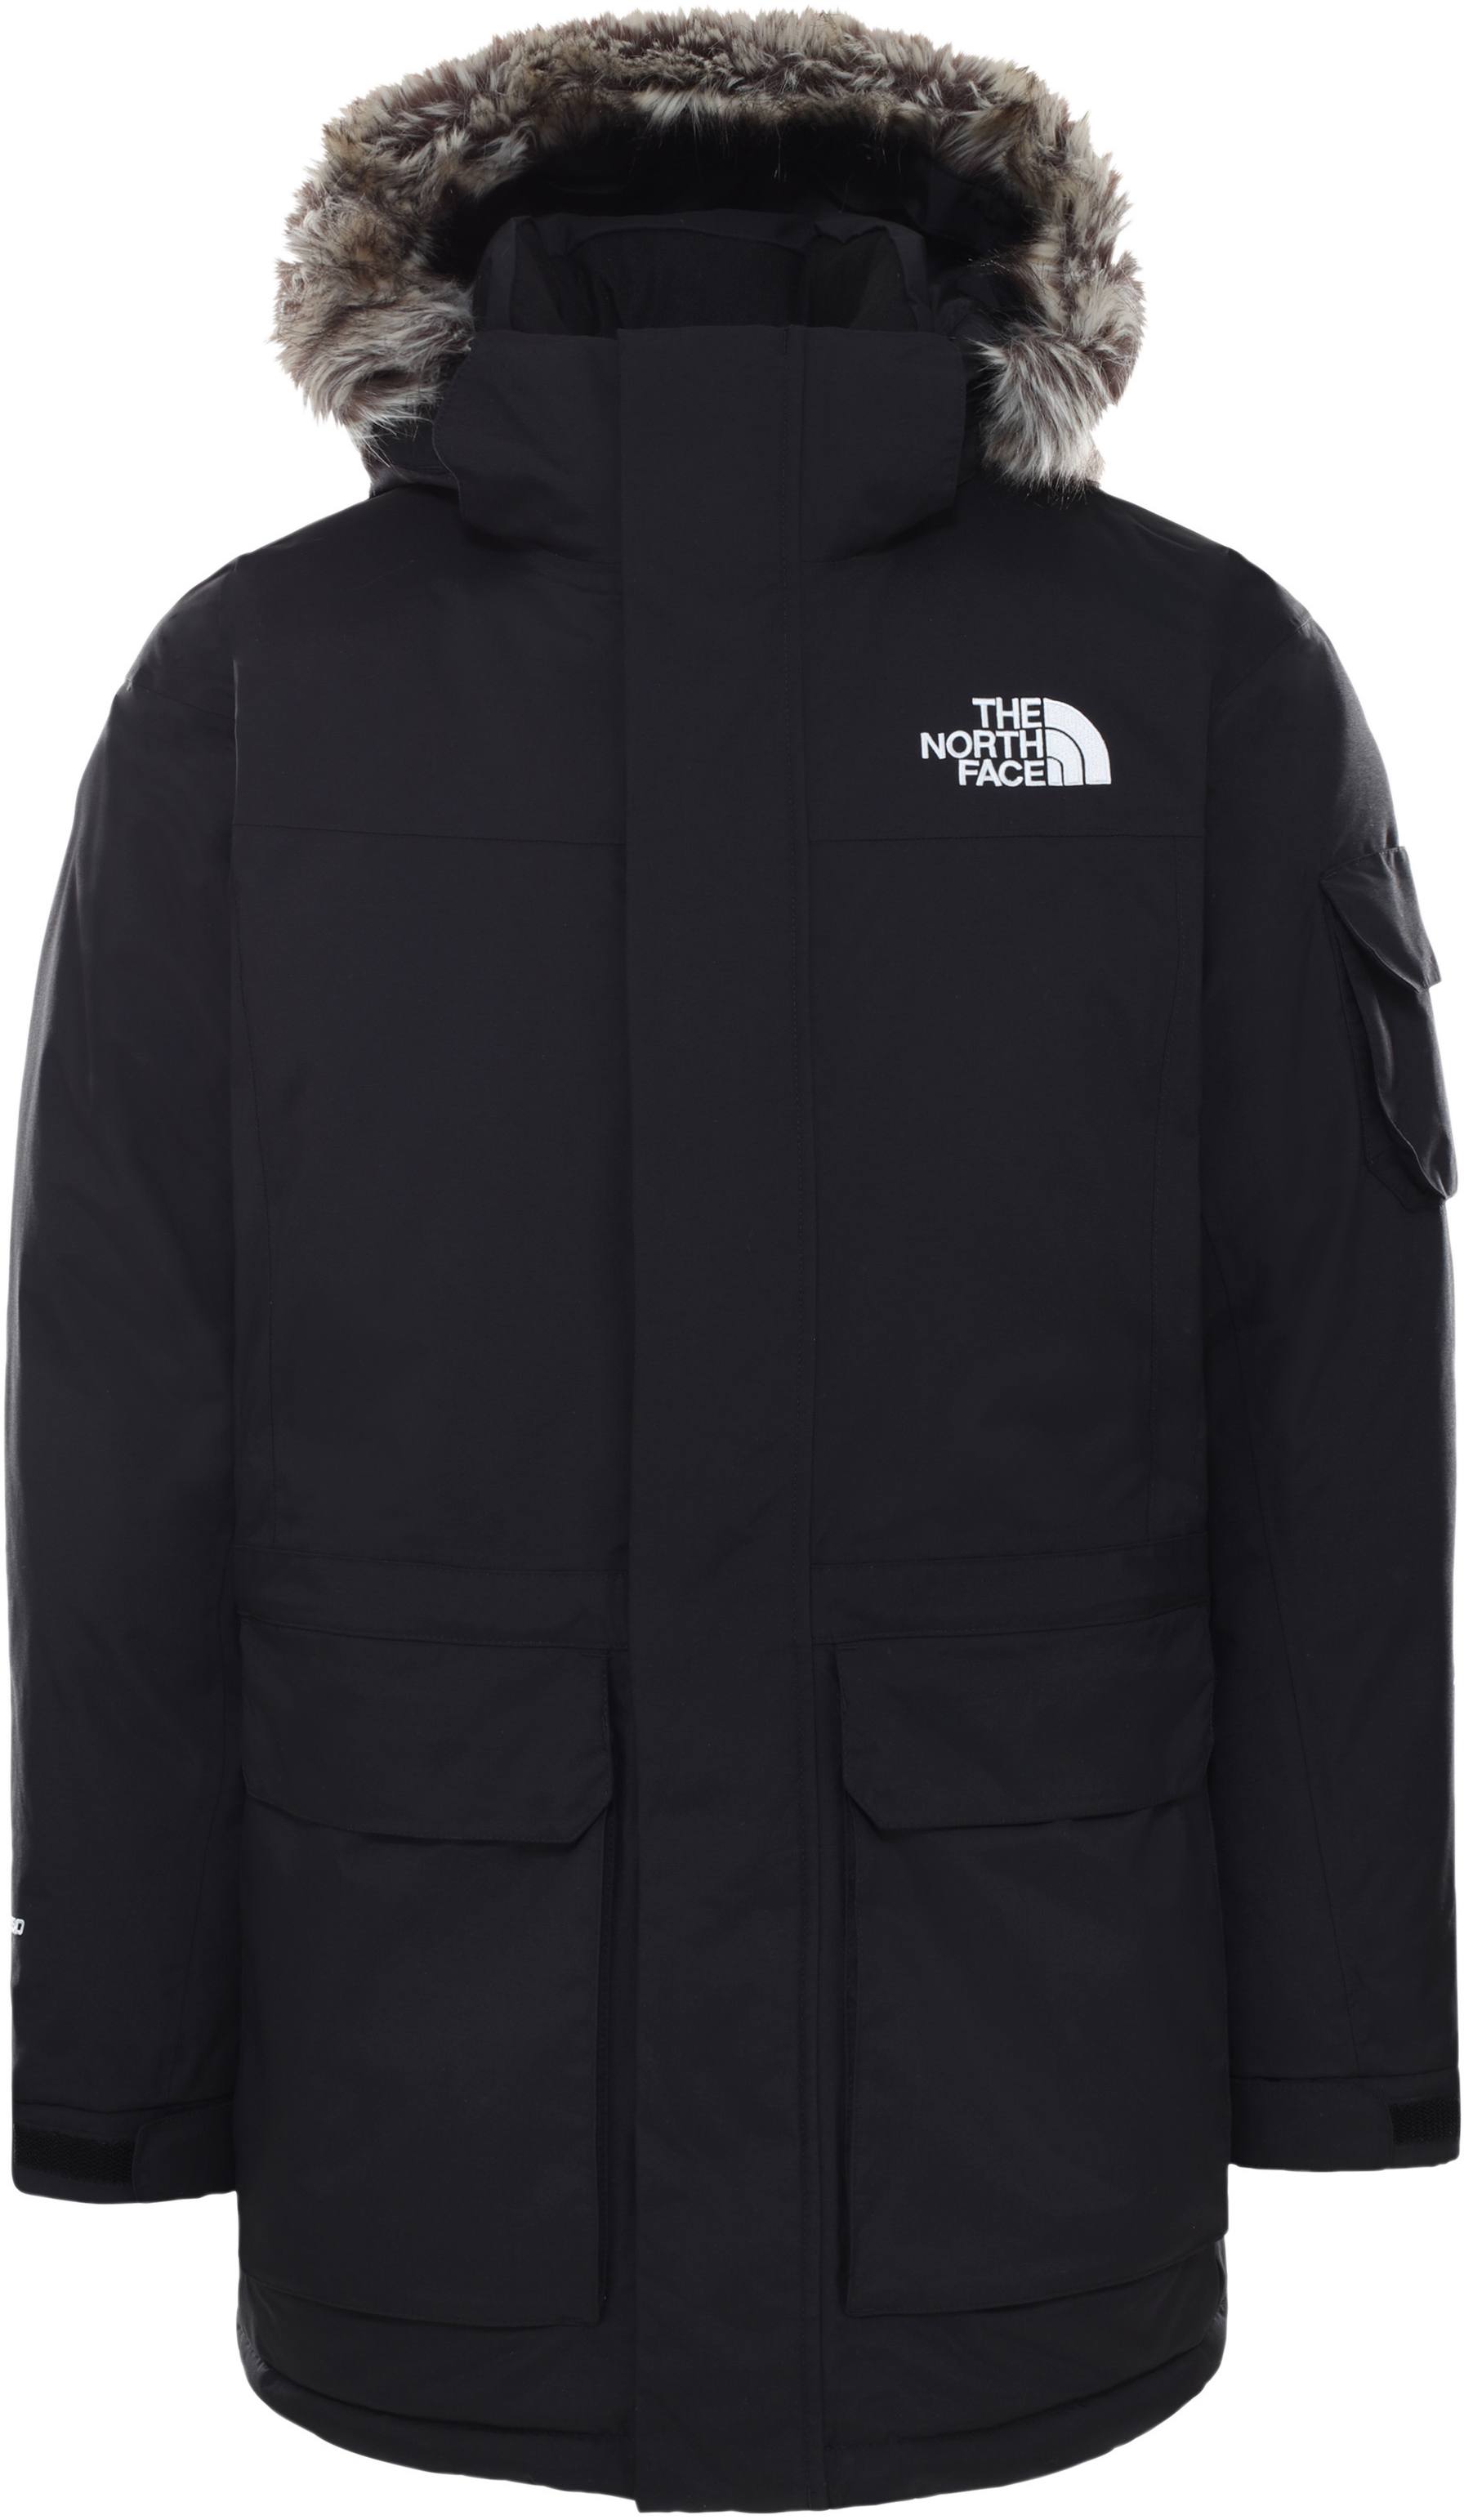 The North Face Recycled McMurdo Jacket Black L